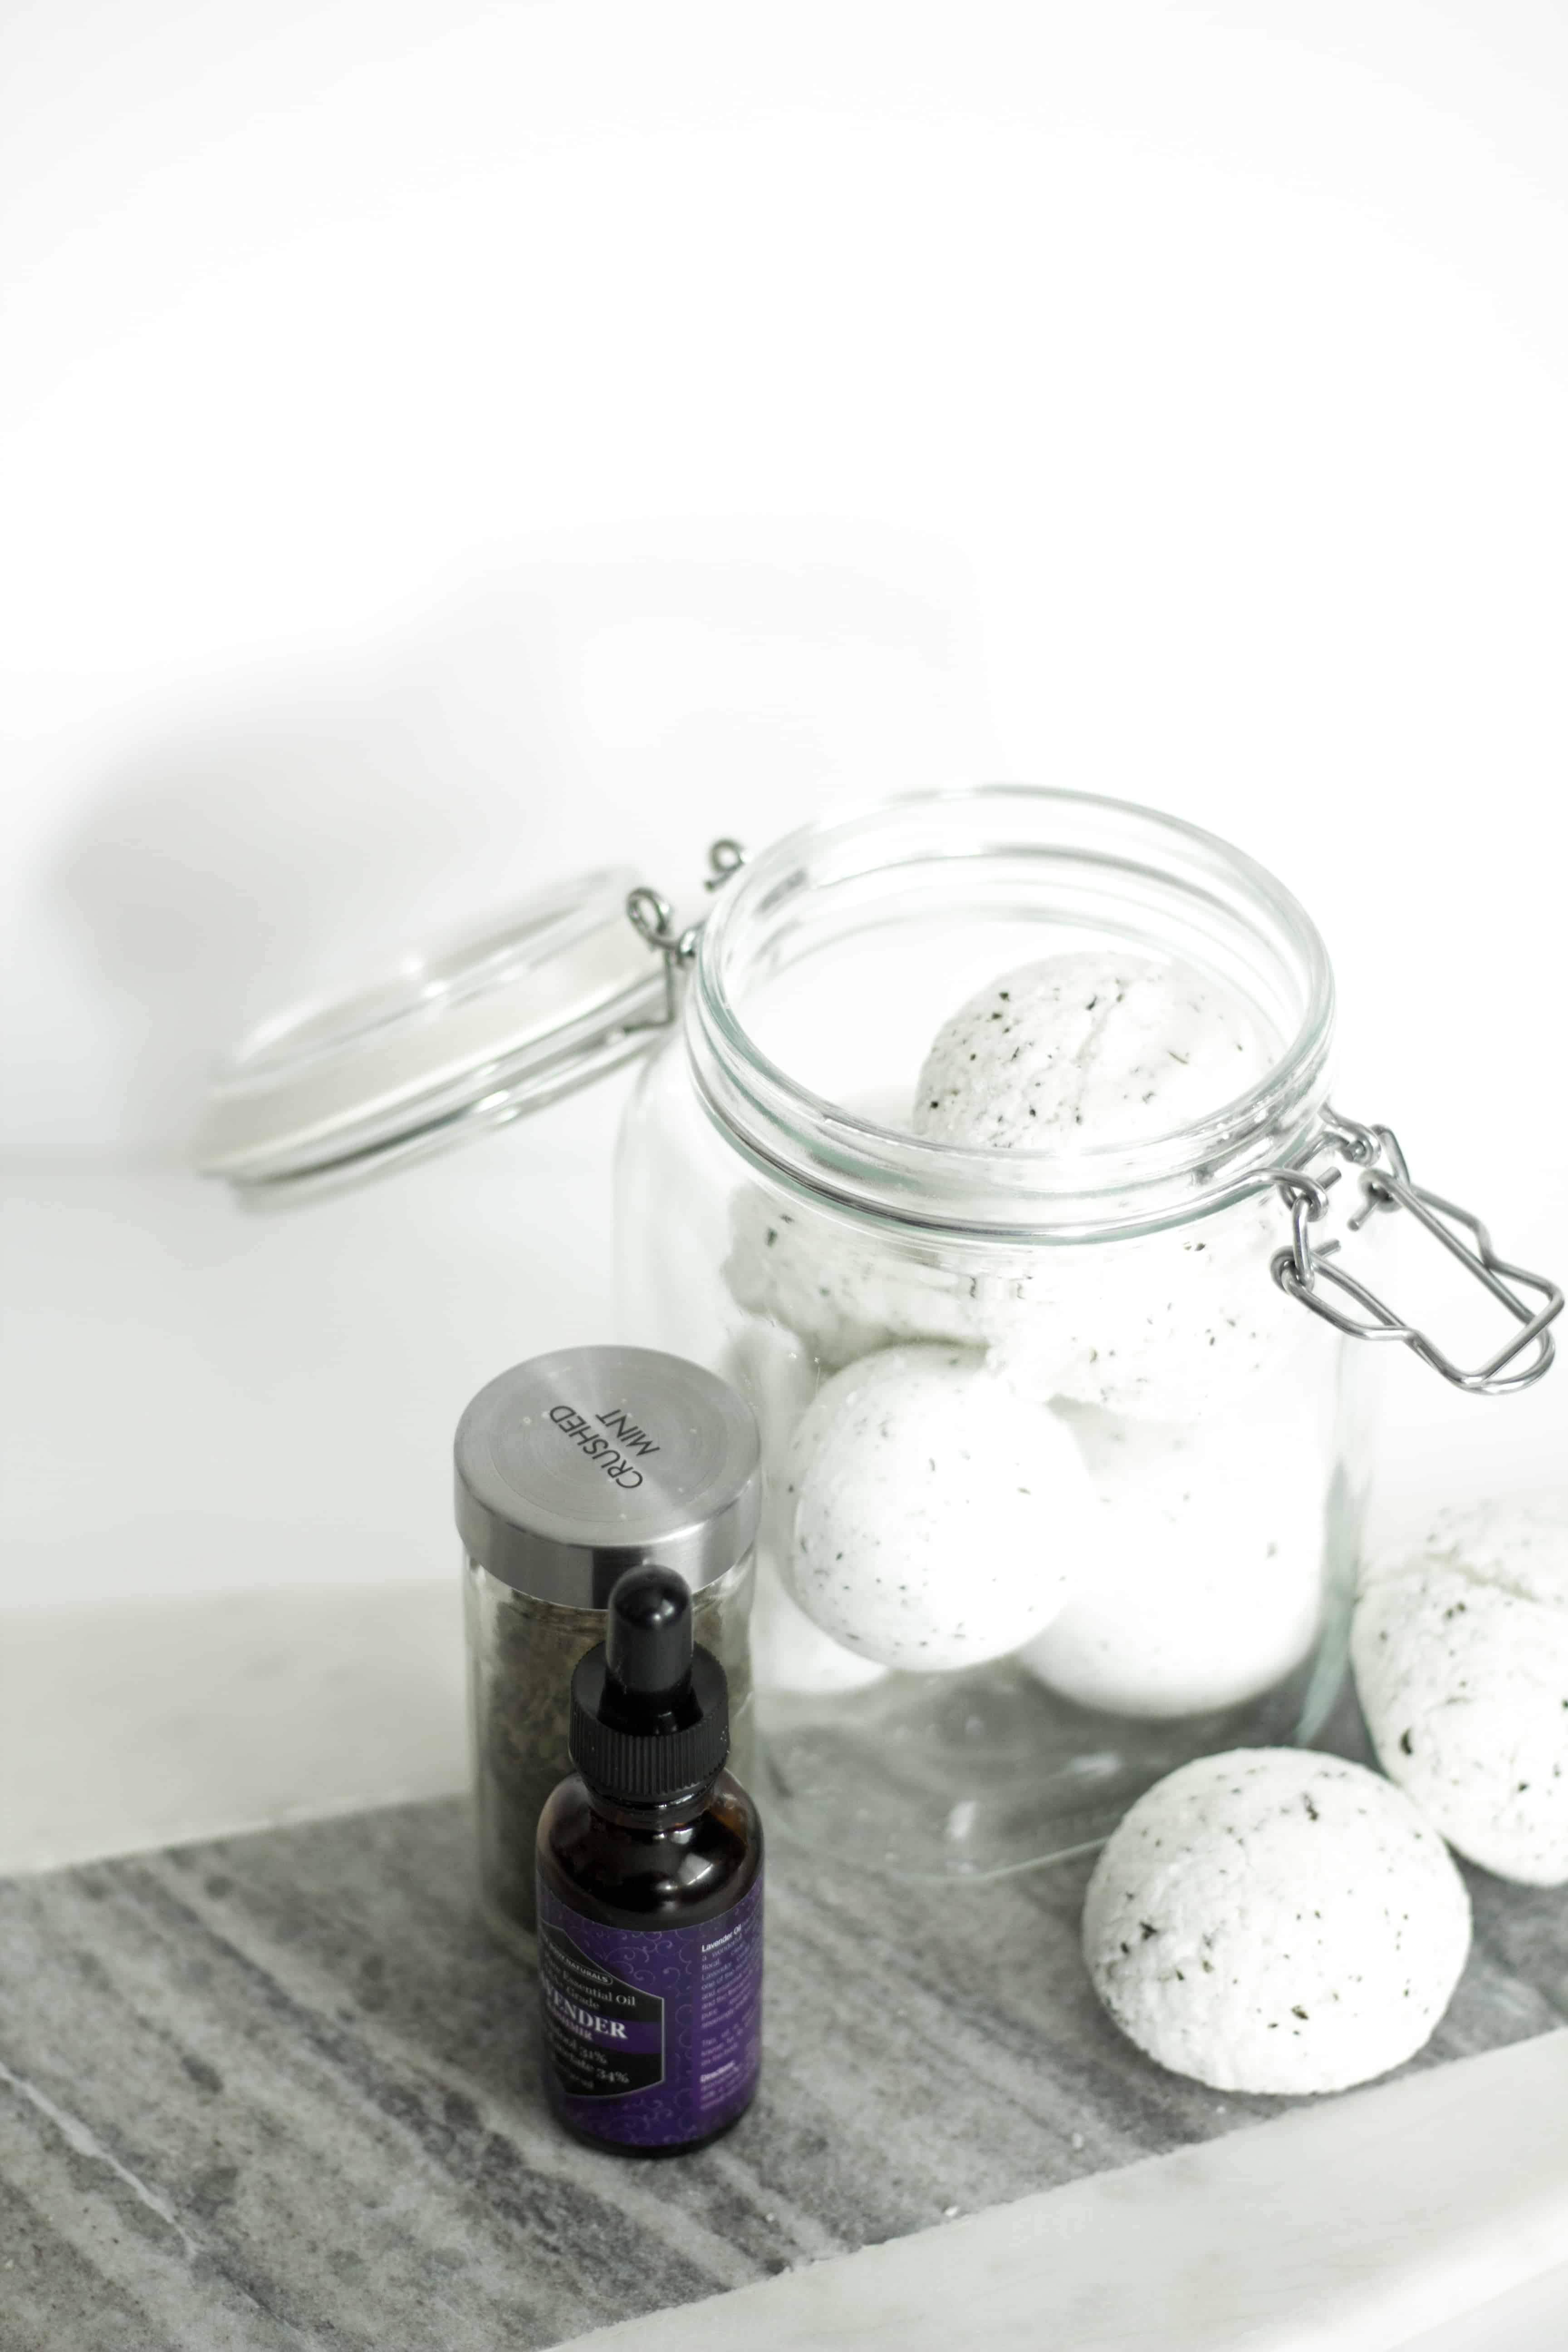 Step by step on how to create these delicious smelling bath bombs without them breaking, sagging or just falling apart!